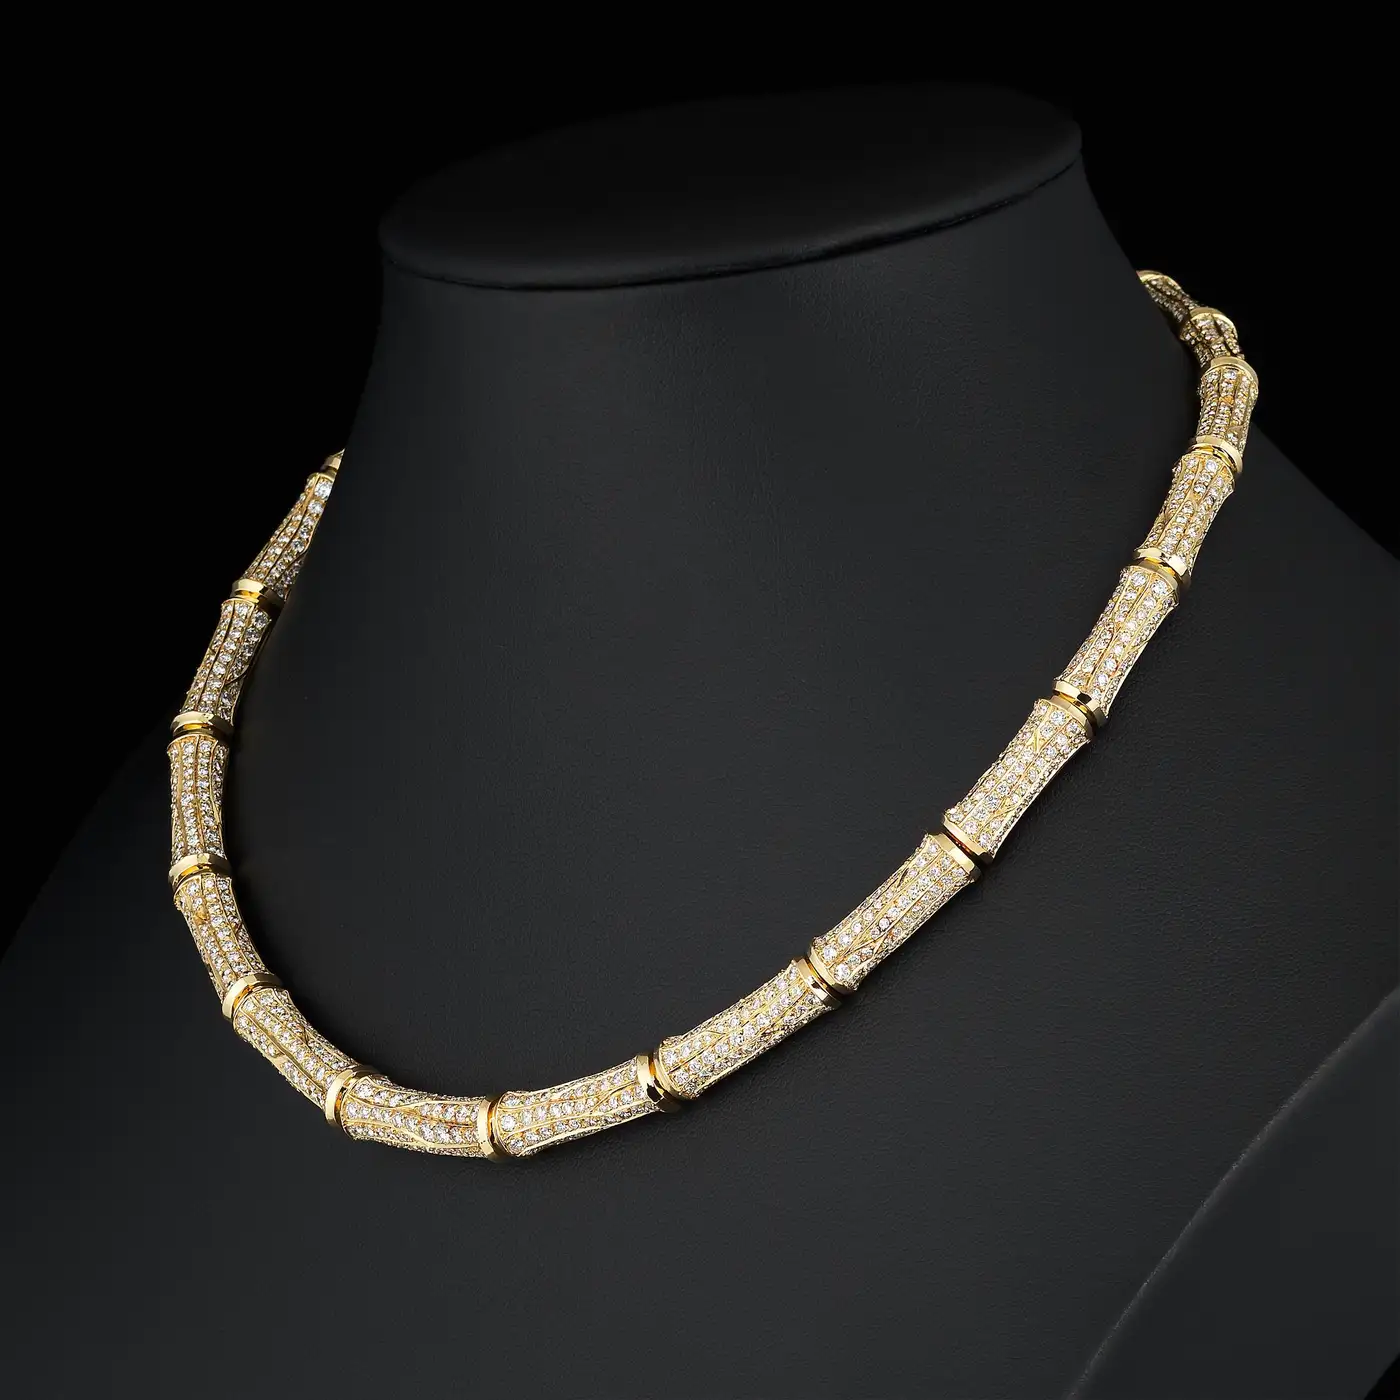 Cartier-26cts-Diamond-Bamboo-Suite-in-18K-Gold-Necklace-and-Earrings-8.webp